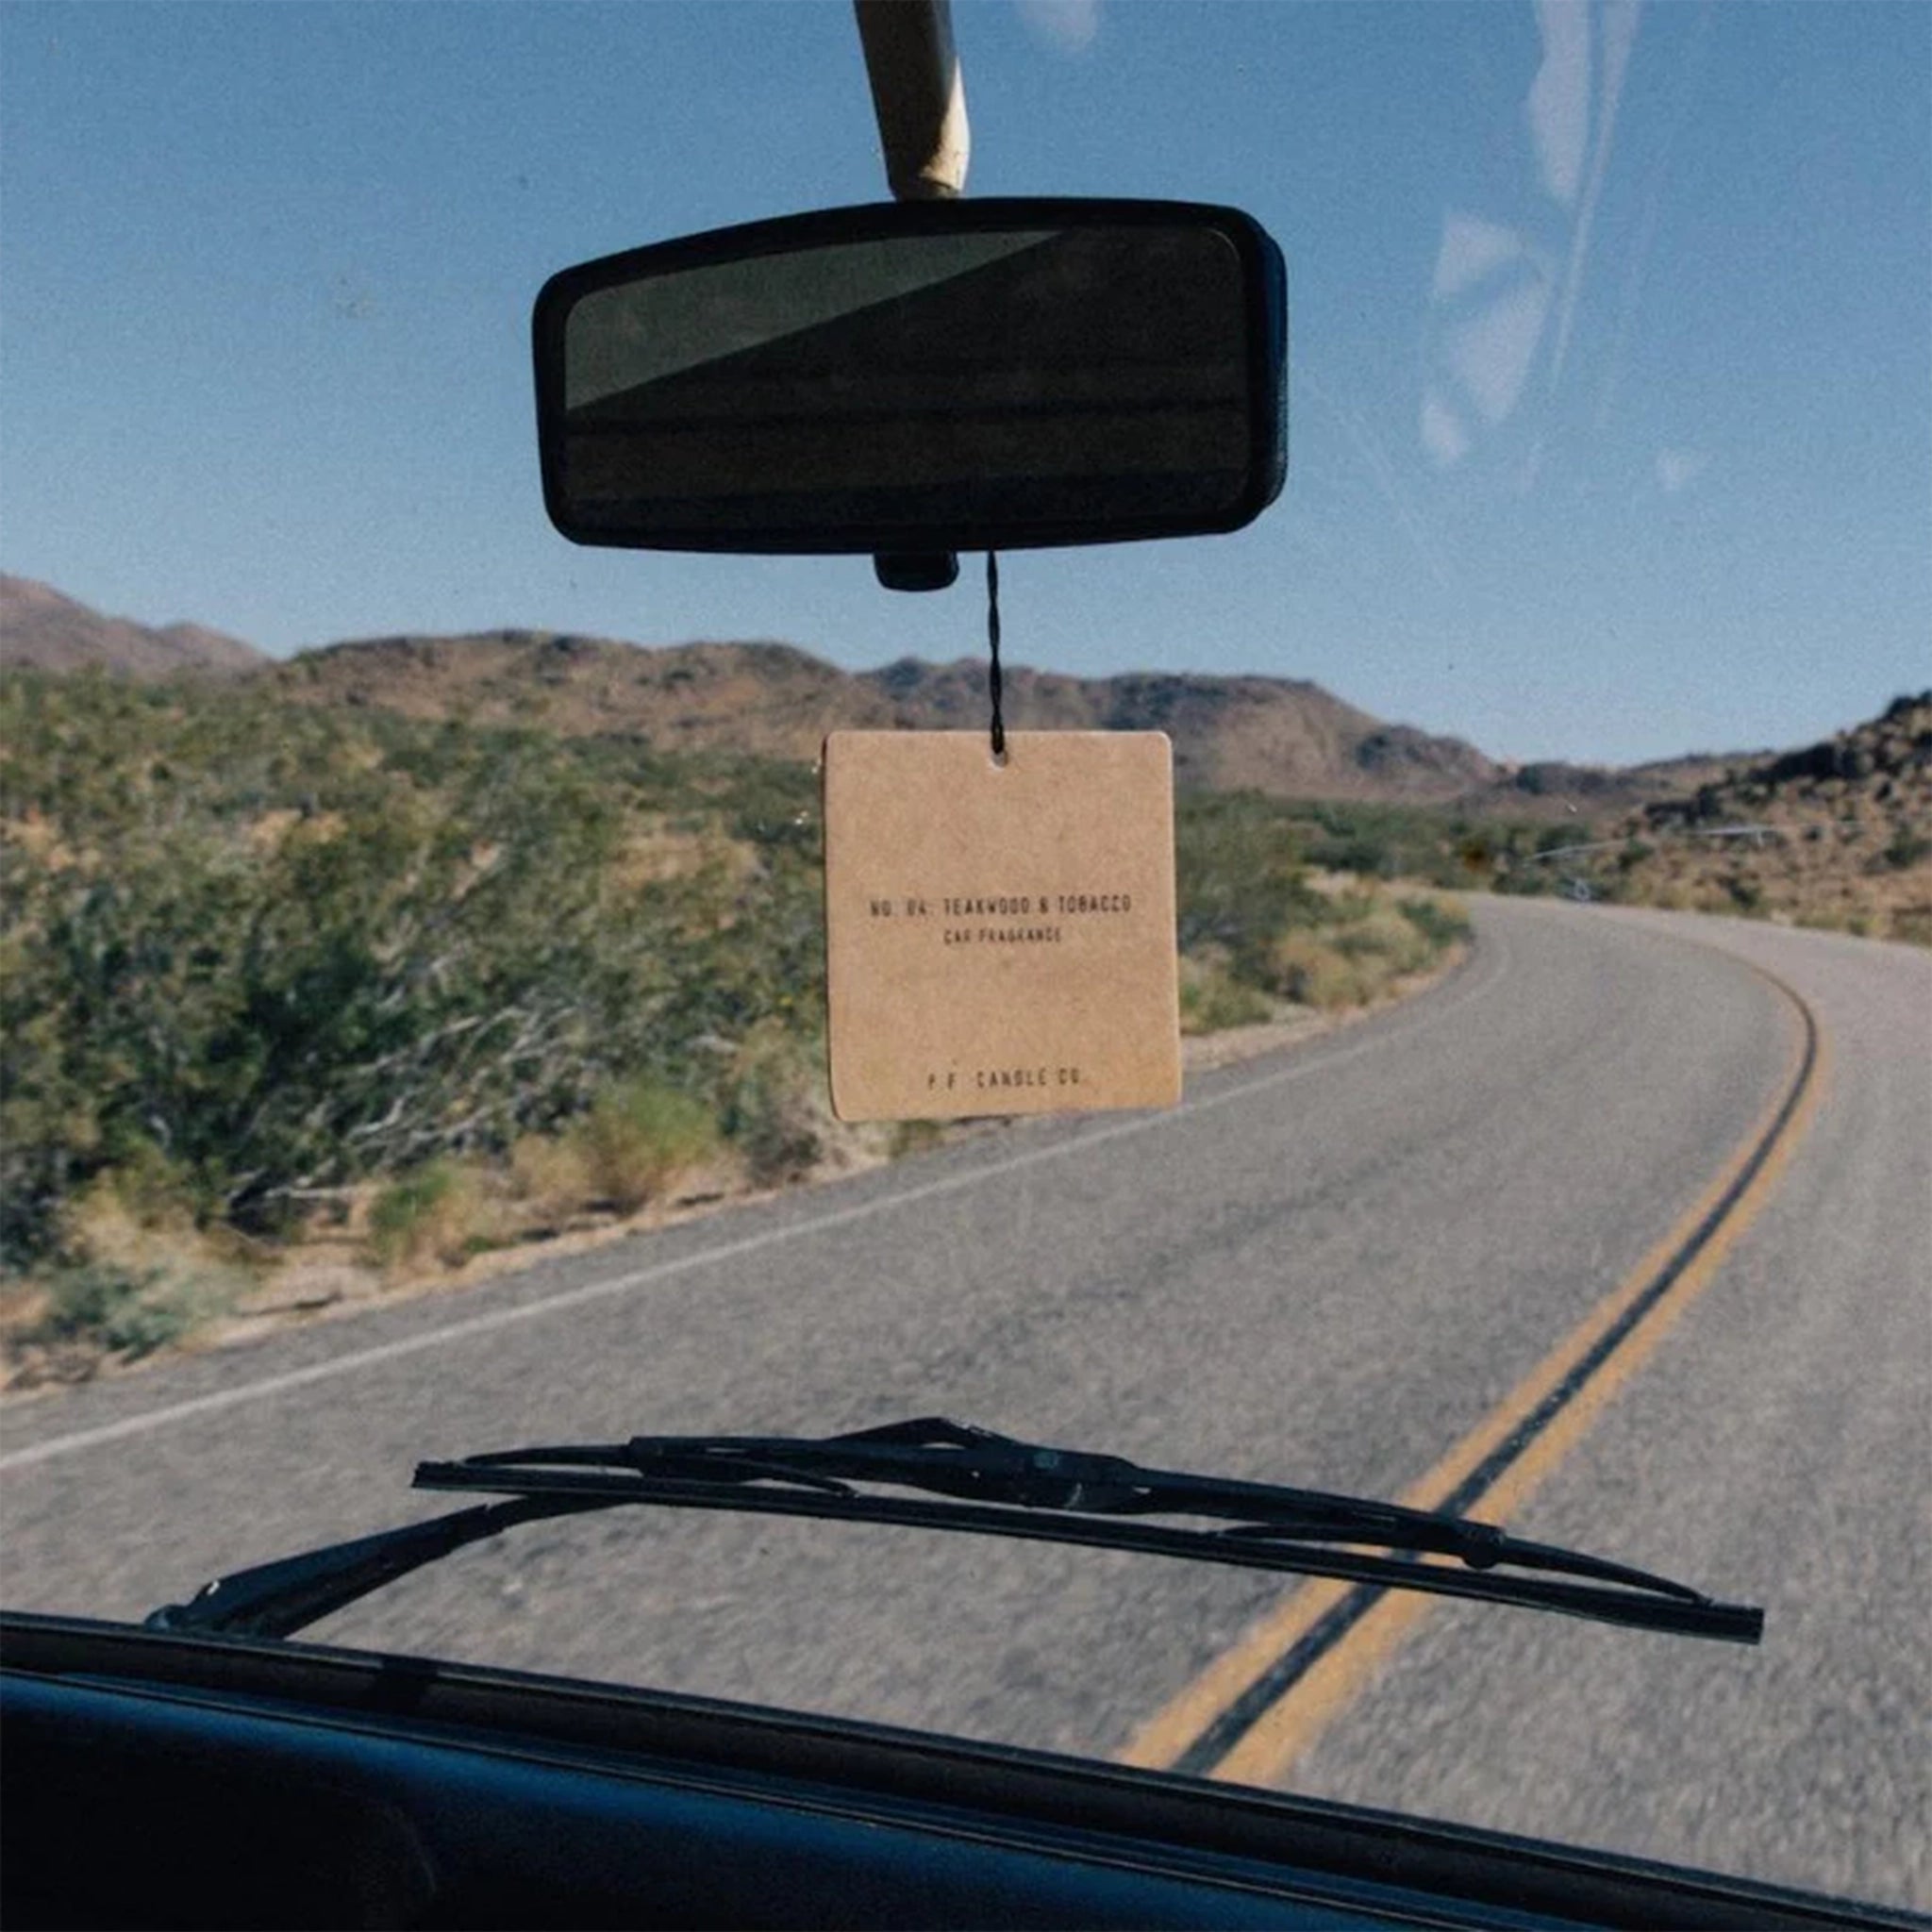 The square cardboard car fragrance hanging from the rear view mirror of a car.